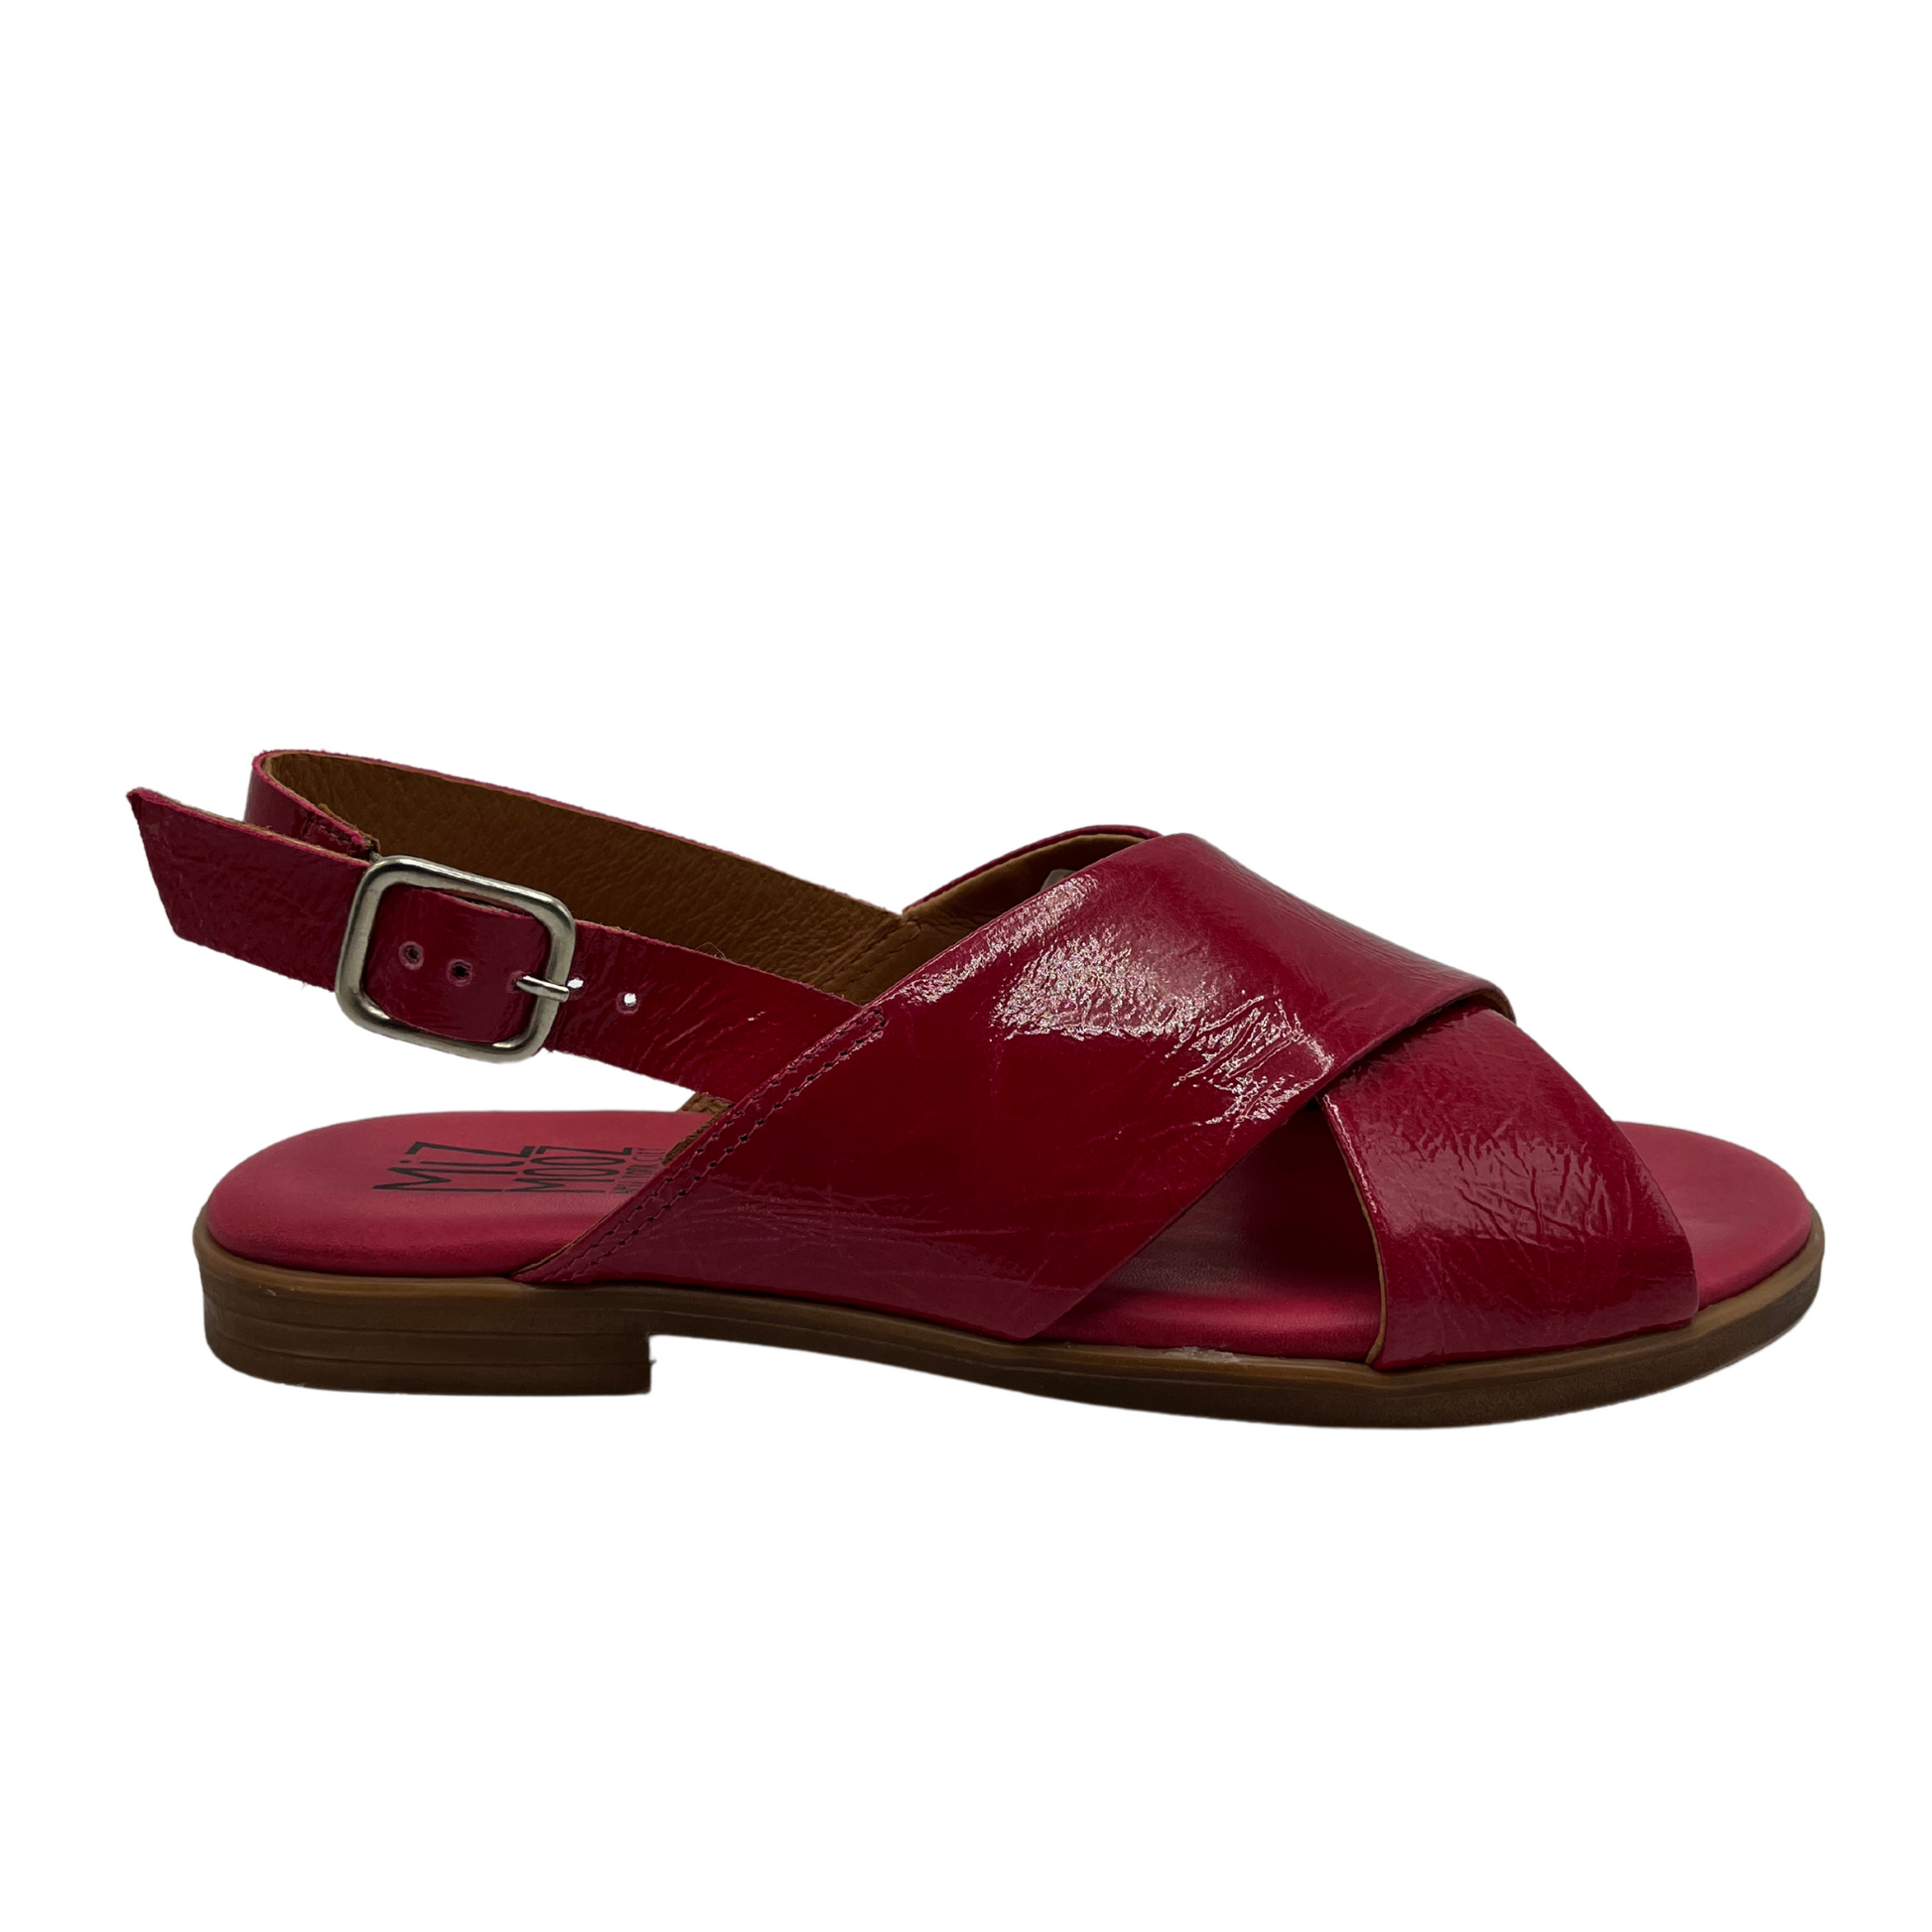 Right facing view of fuchsia leather flat sandal with low heel, buckle sling back strap and open toe